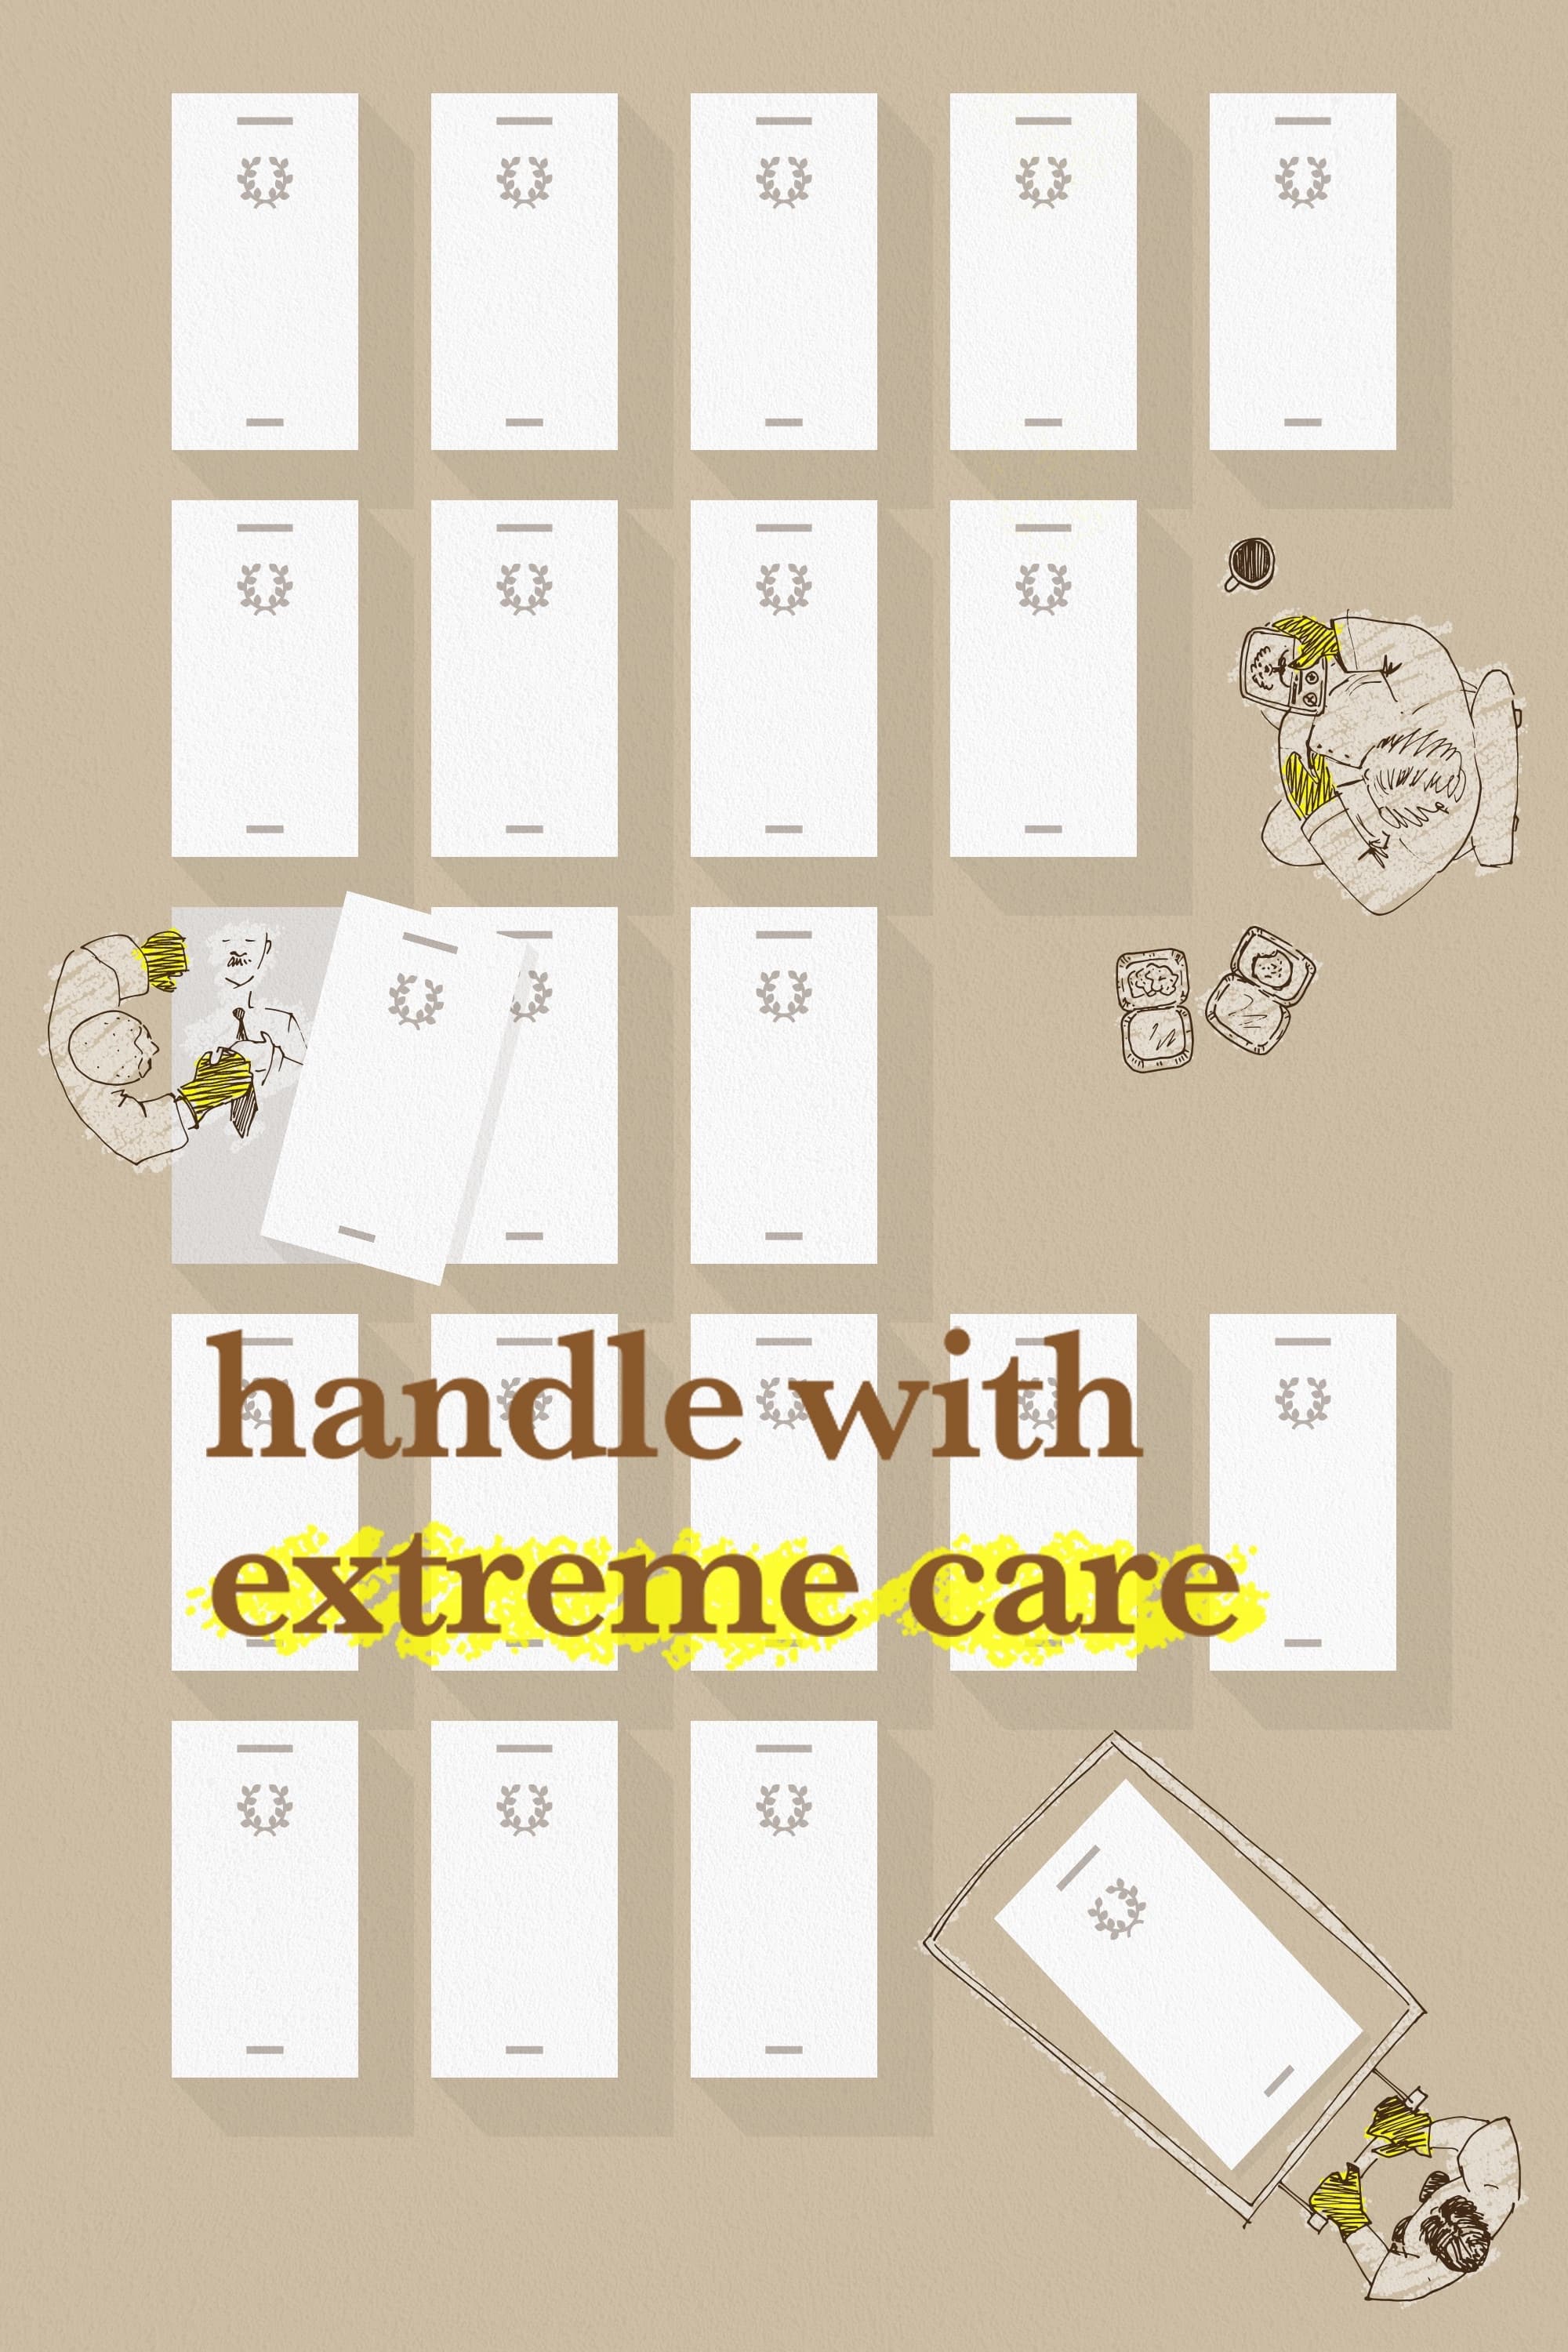 Handle with Extreme Care